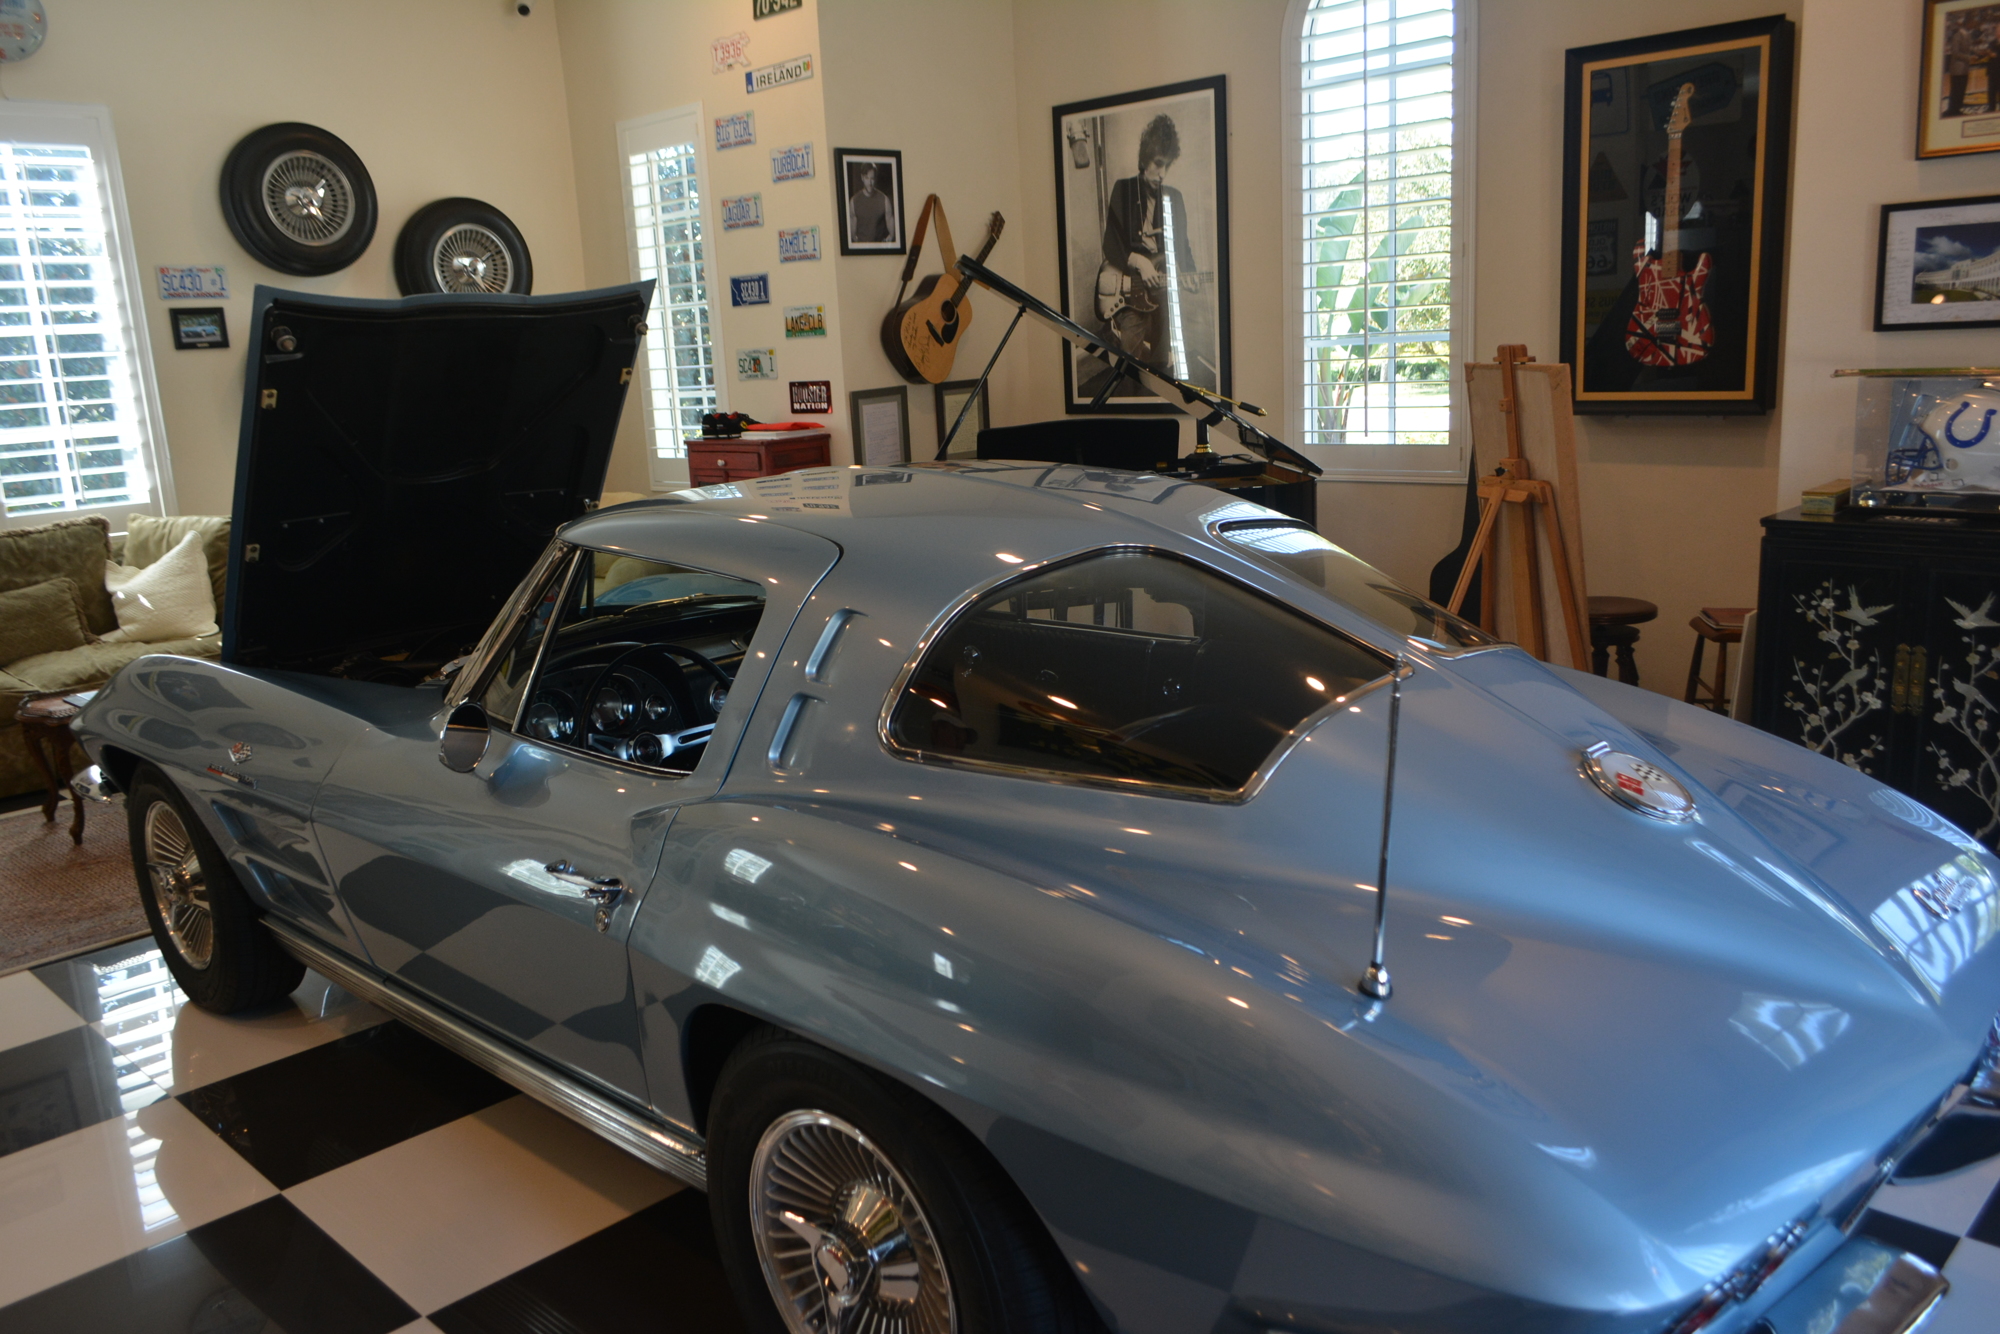 The home includes an auto museum which includes this 100% original 63 Z06 Corvette.